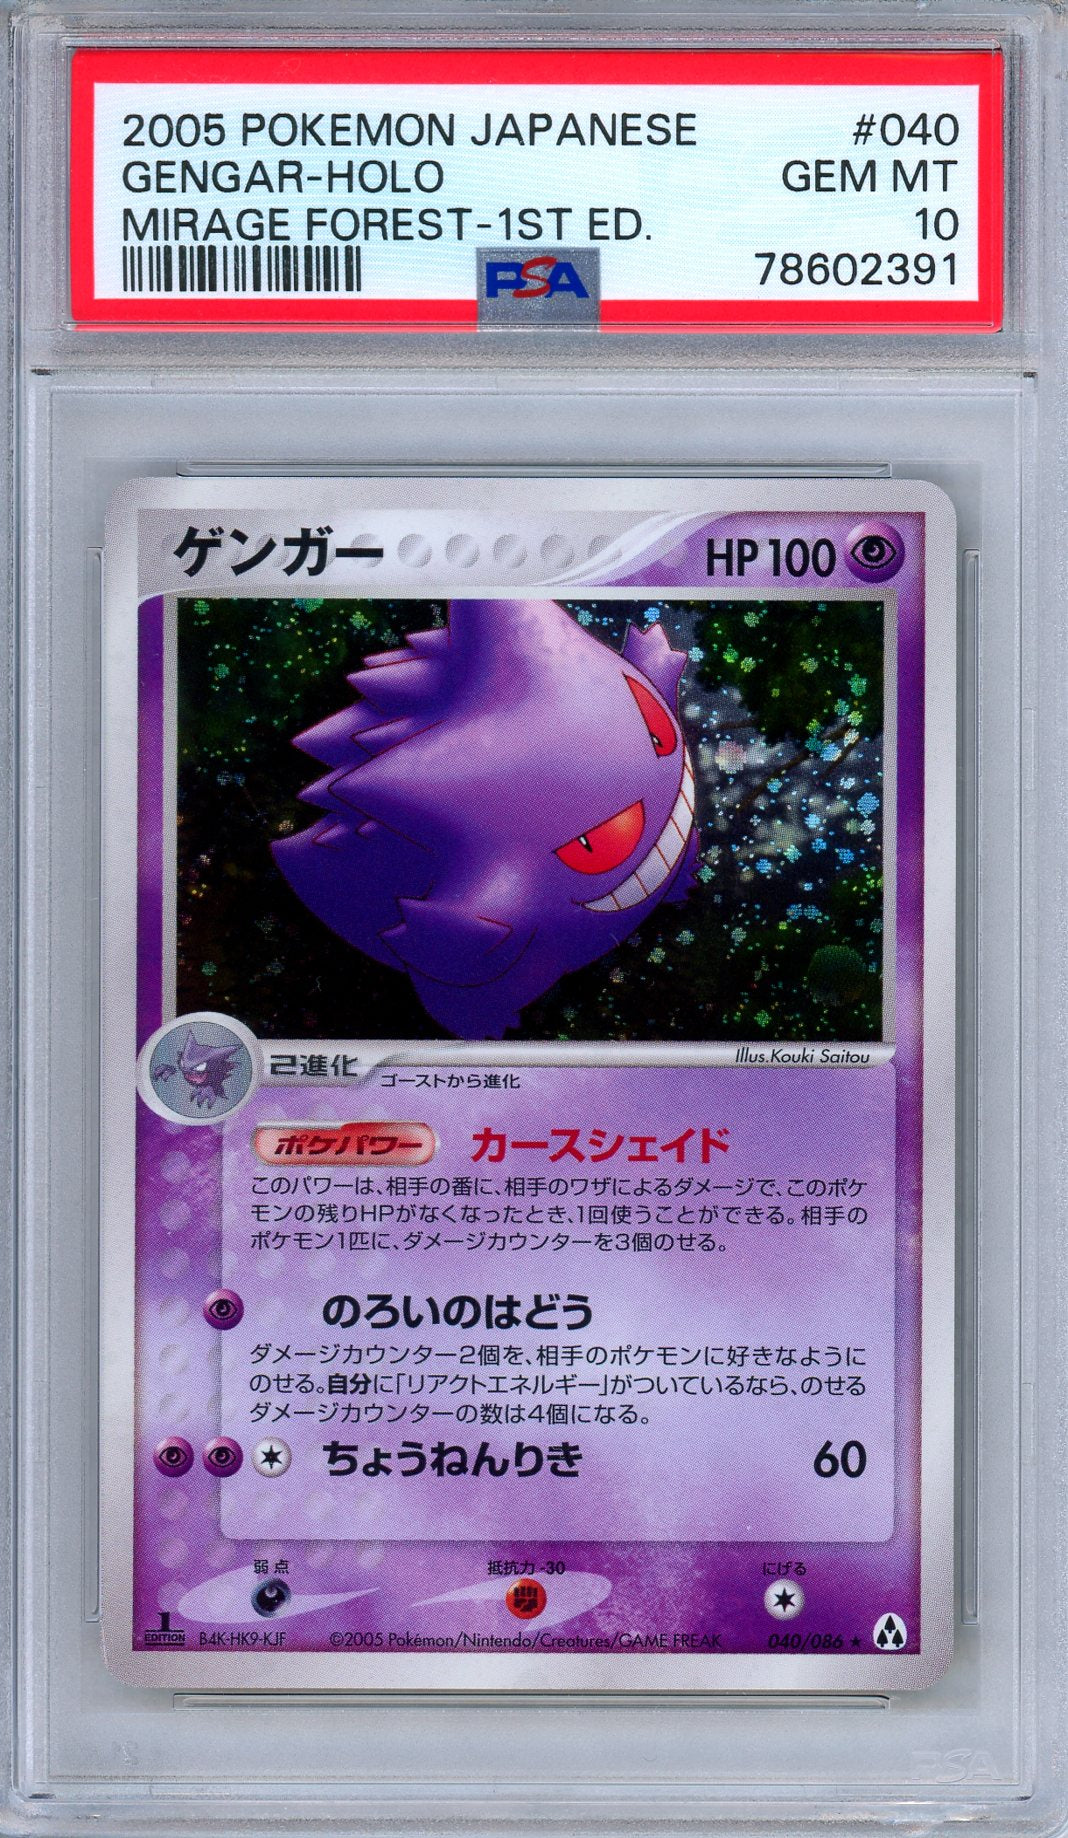 PSA 10 Gengar 040/086 Mirage Forest 1st Edition Holo Rare Japanese 